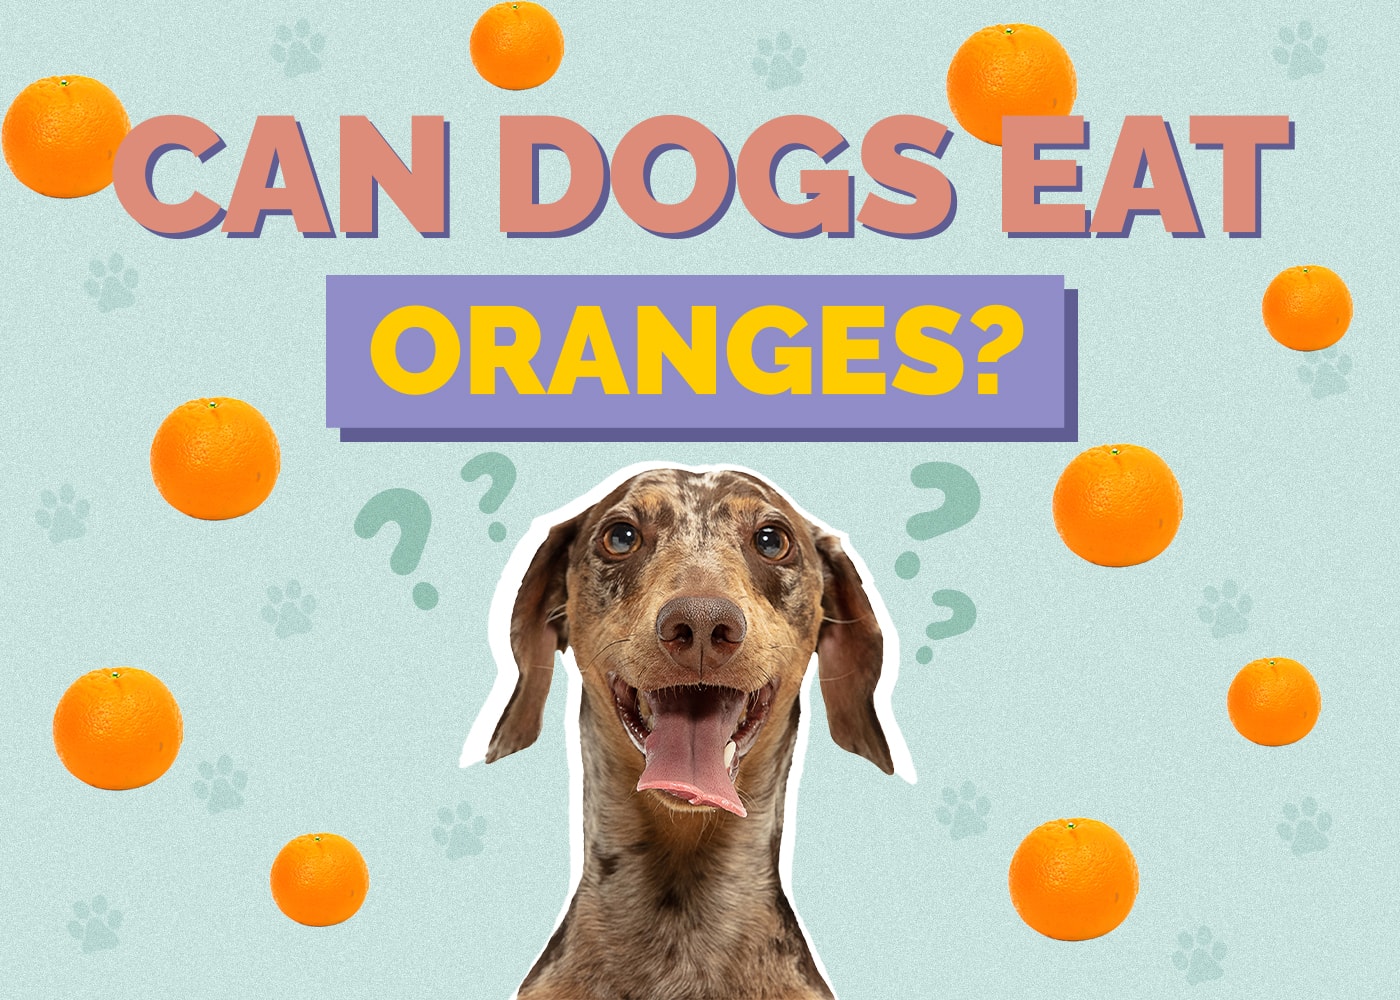 Can Dogs Eat oranges